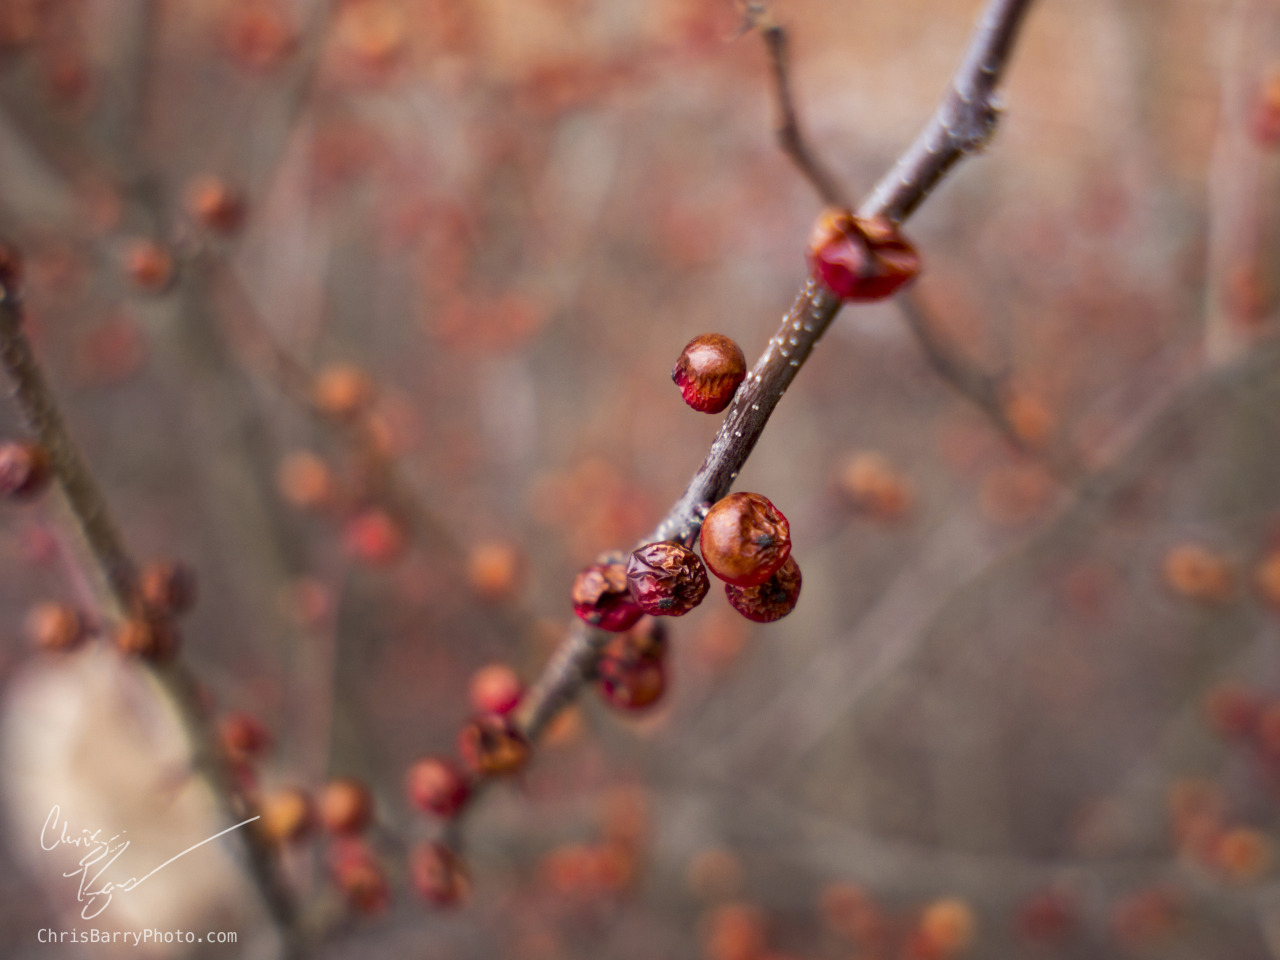 Actually a decent amount of pictures today, starting out with bokeh berries